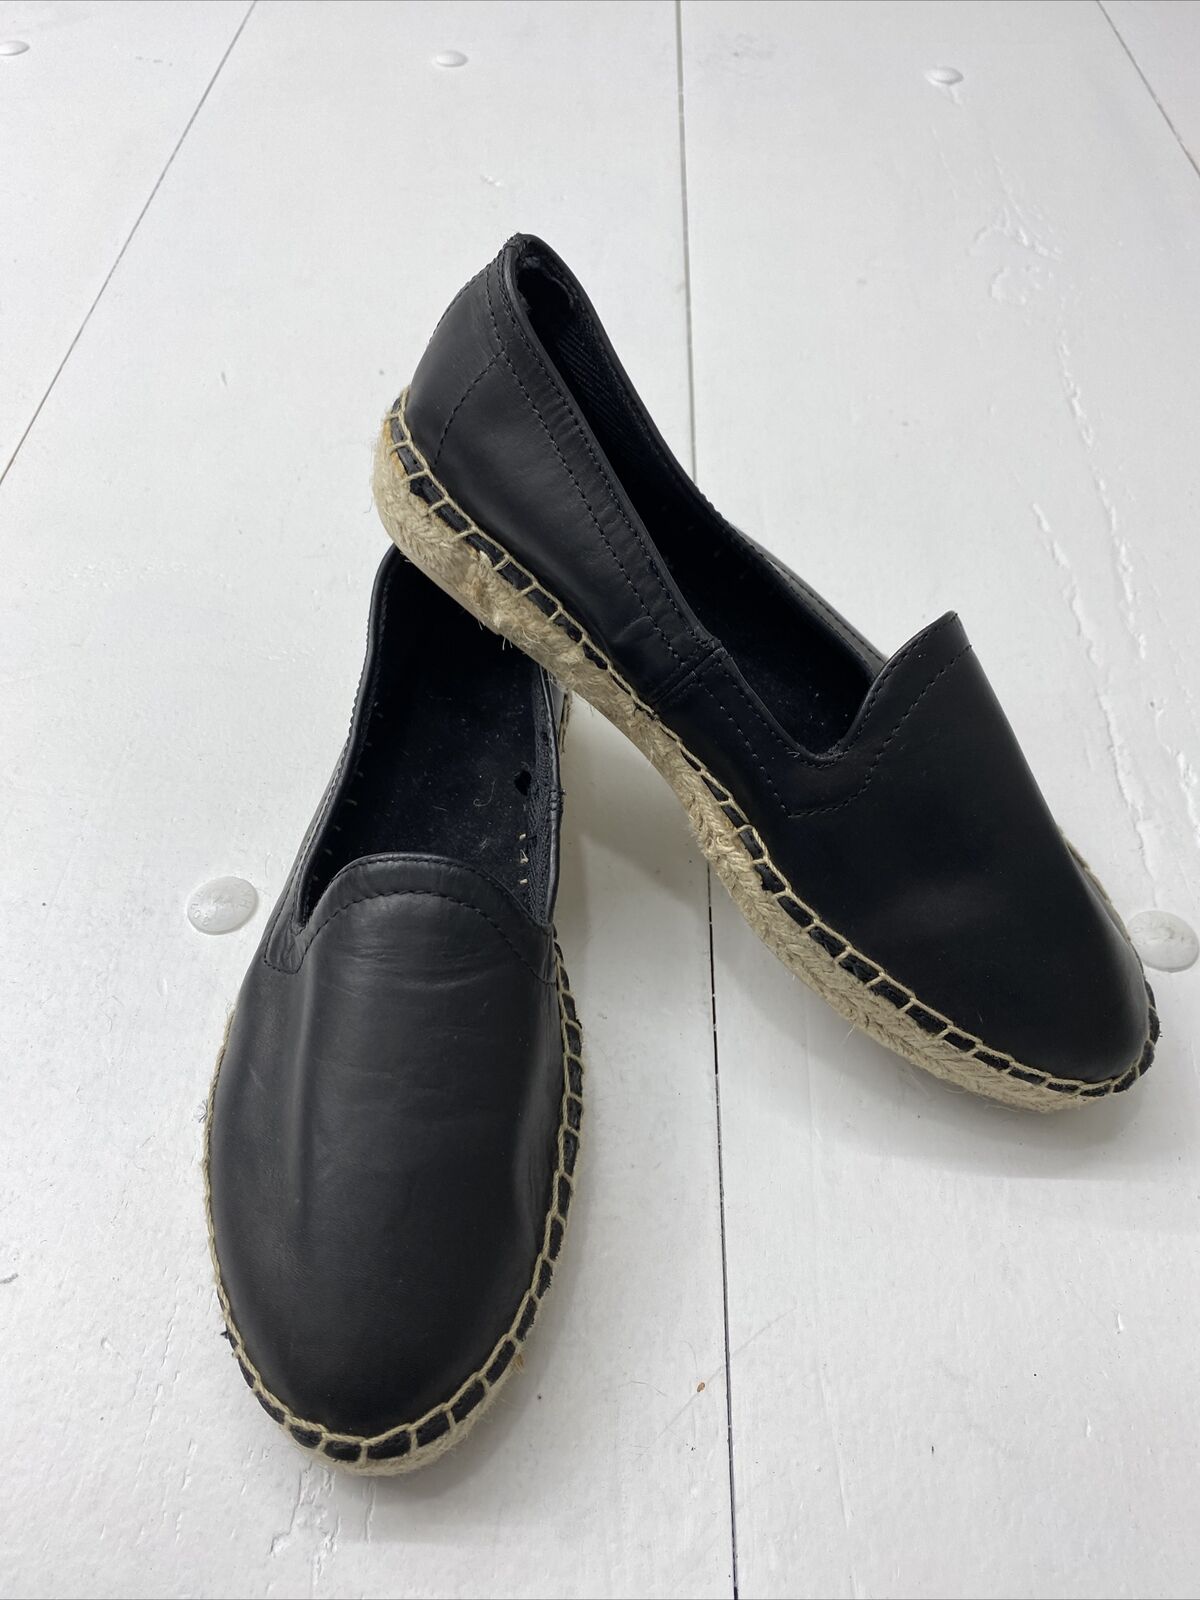 Gap Black Leather Espadrille Loafers Slip On Shoes Round Toe S - beyond exchange